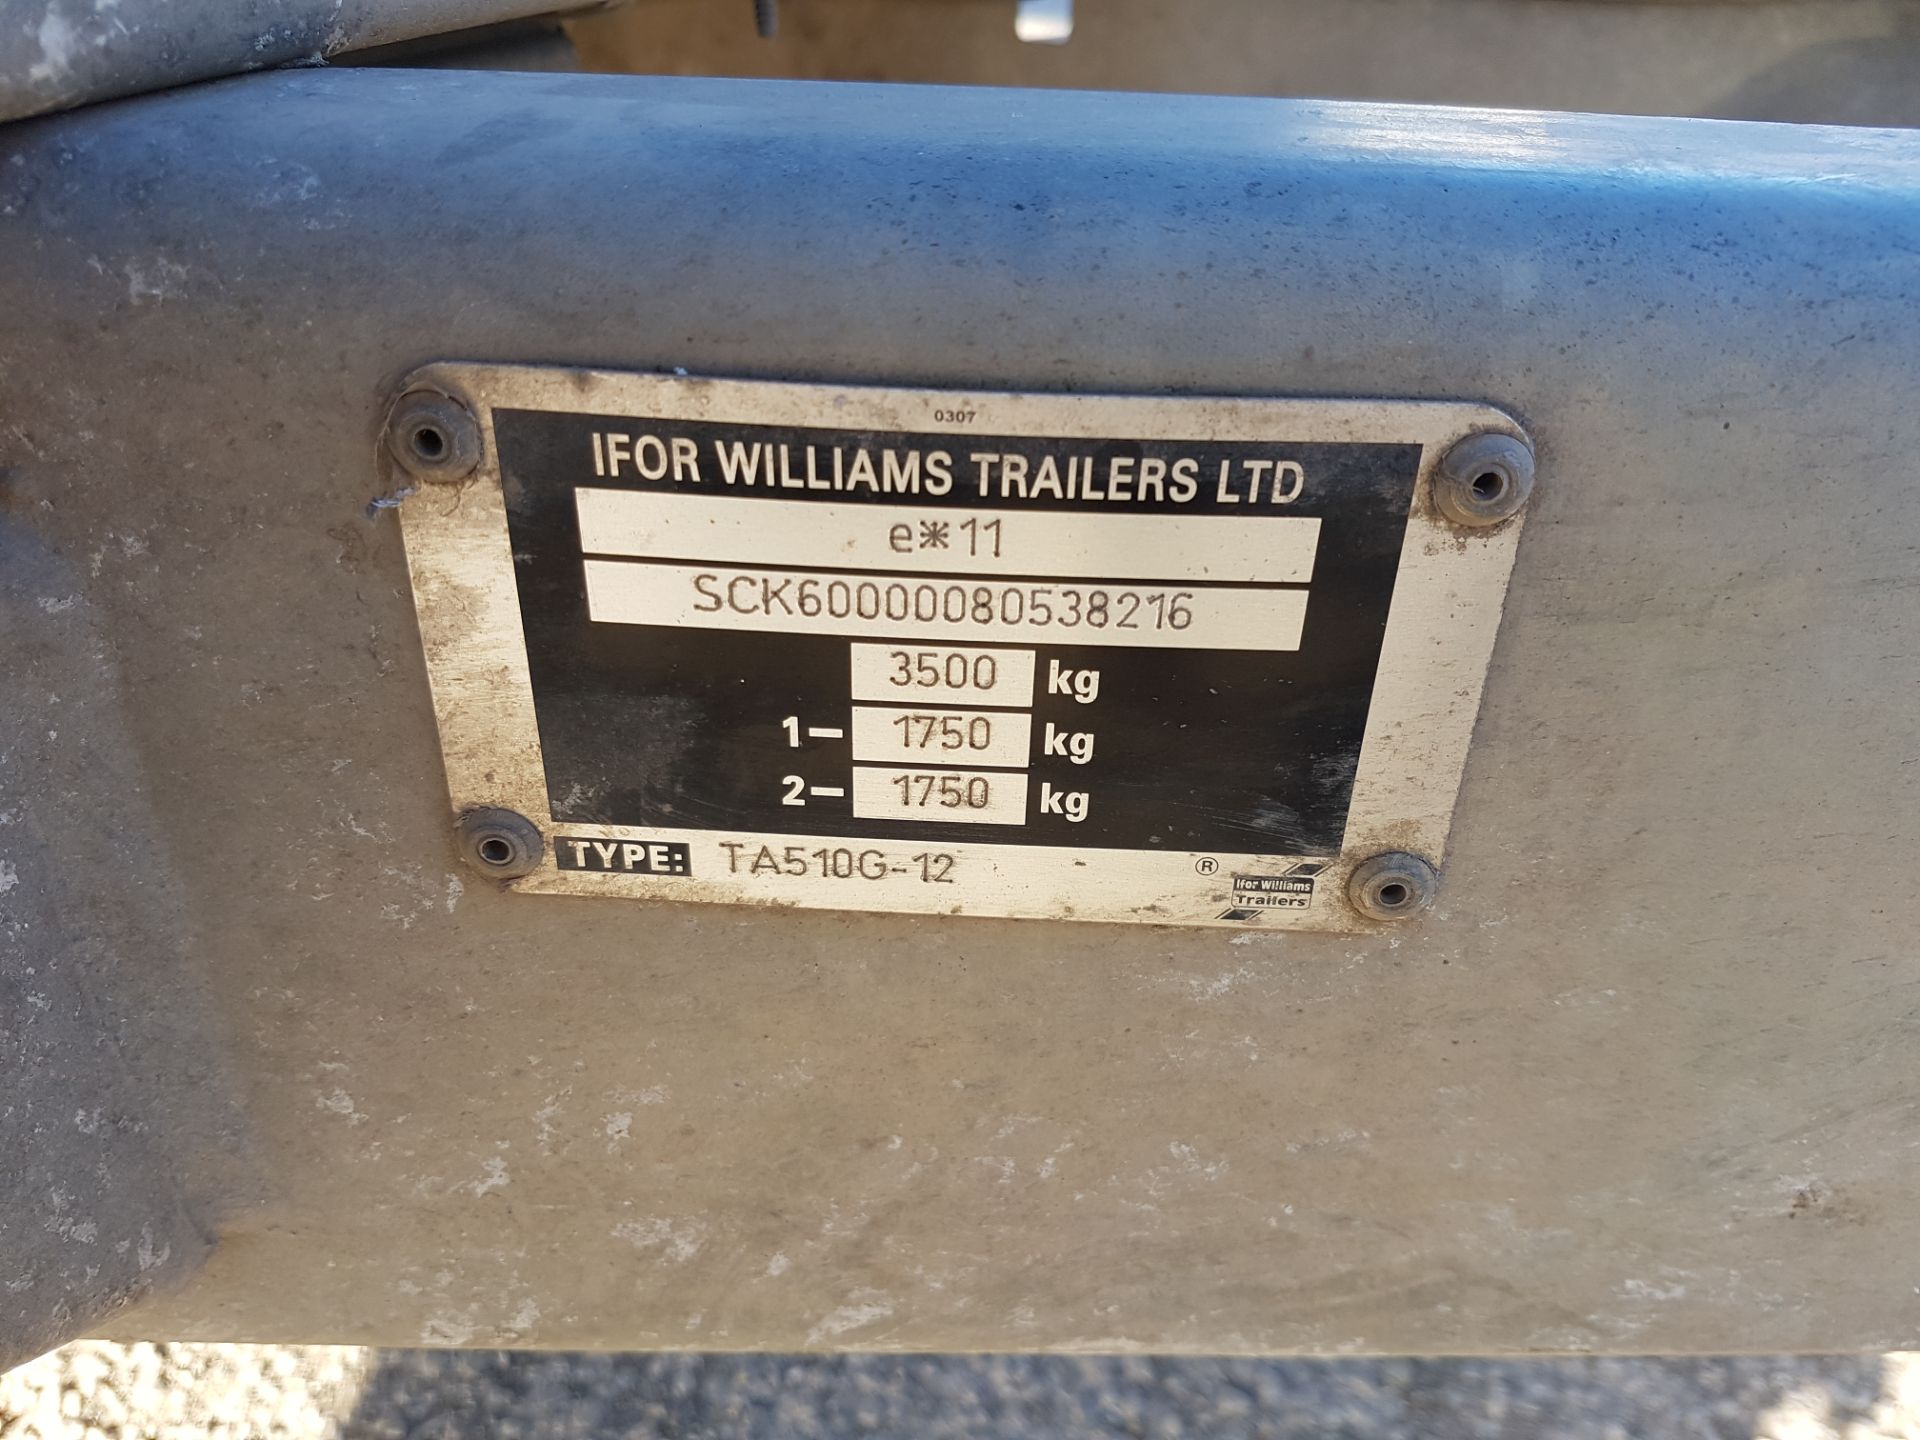 2008 TA-510 LIVESTOCK IFOR WILLIAMS TWIN AXLE TRAILER FITTED WITH SHEET DECKS - Image 7 of 14